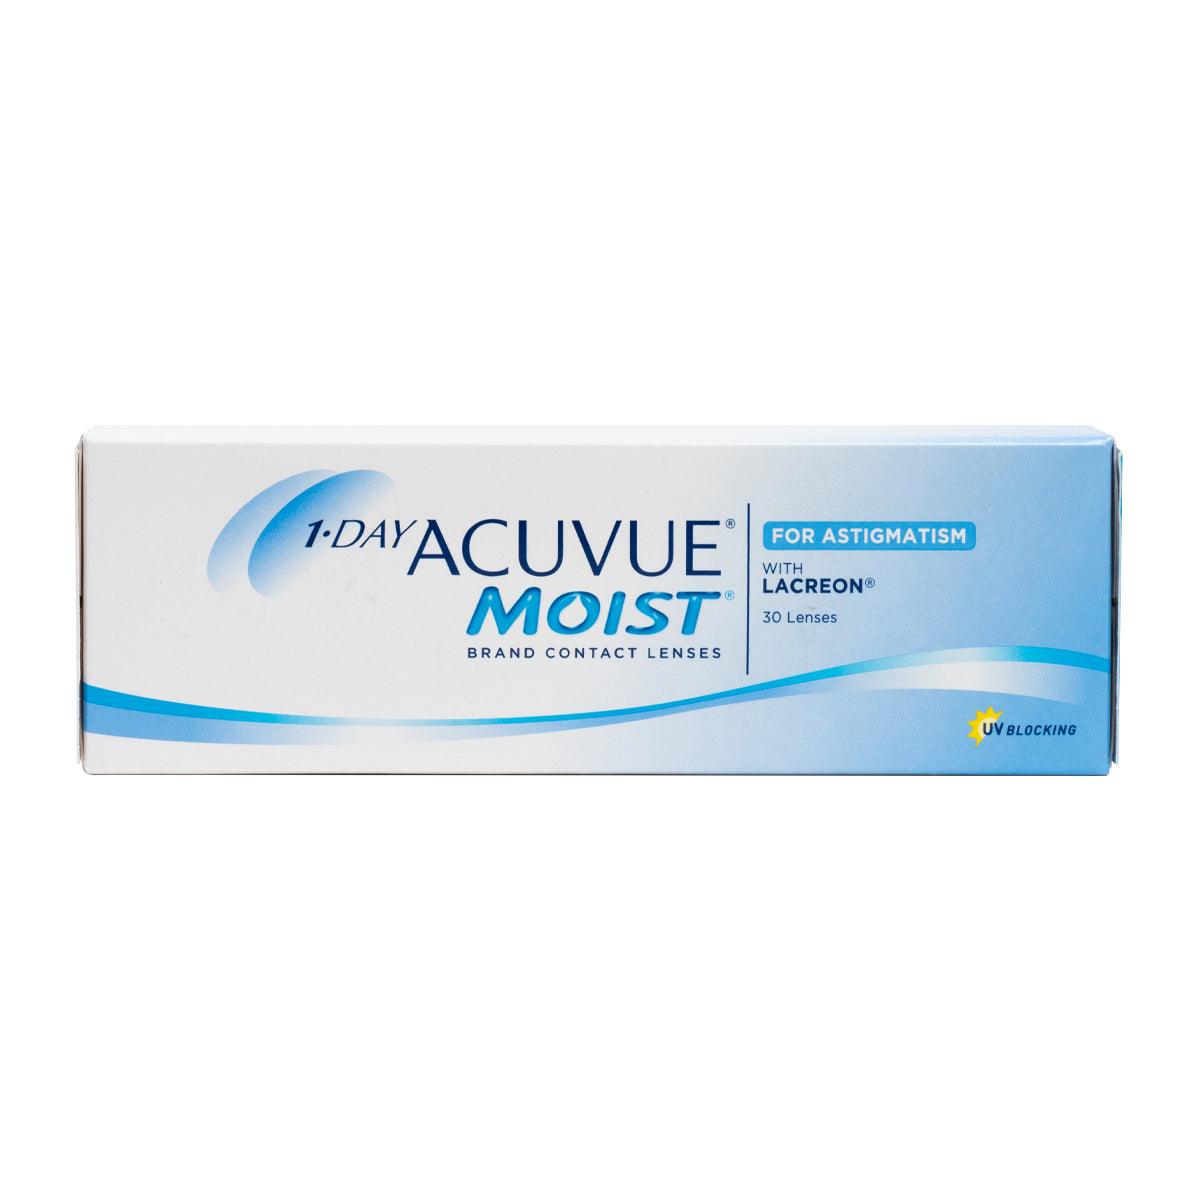 1-Day Acuvue Moist for Astigmatism - TA-TO.com